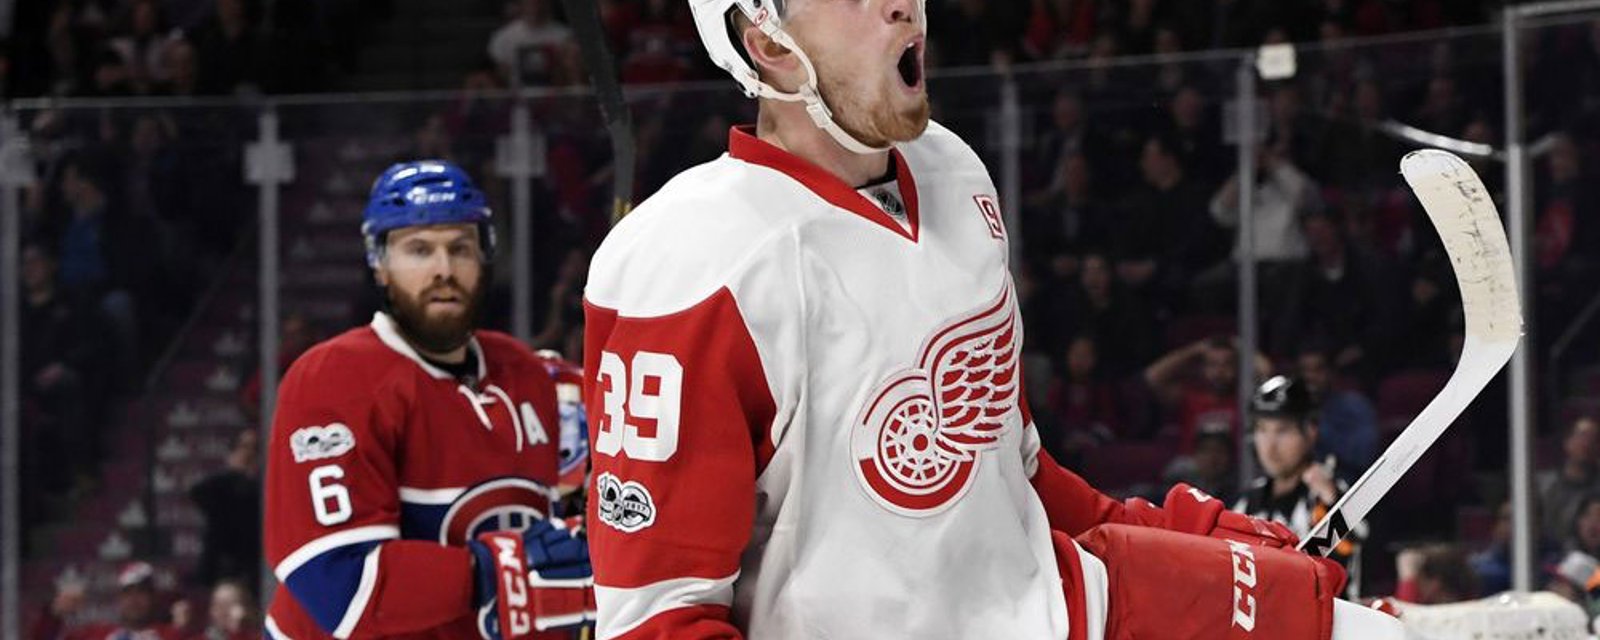 MONSTER trade speculation between Wings and Habs!